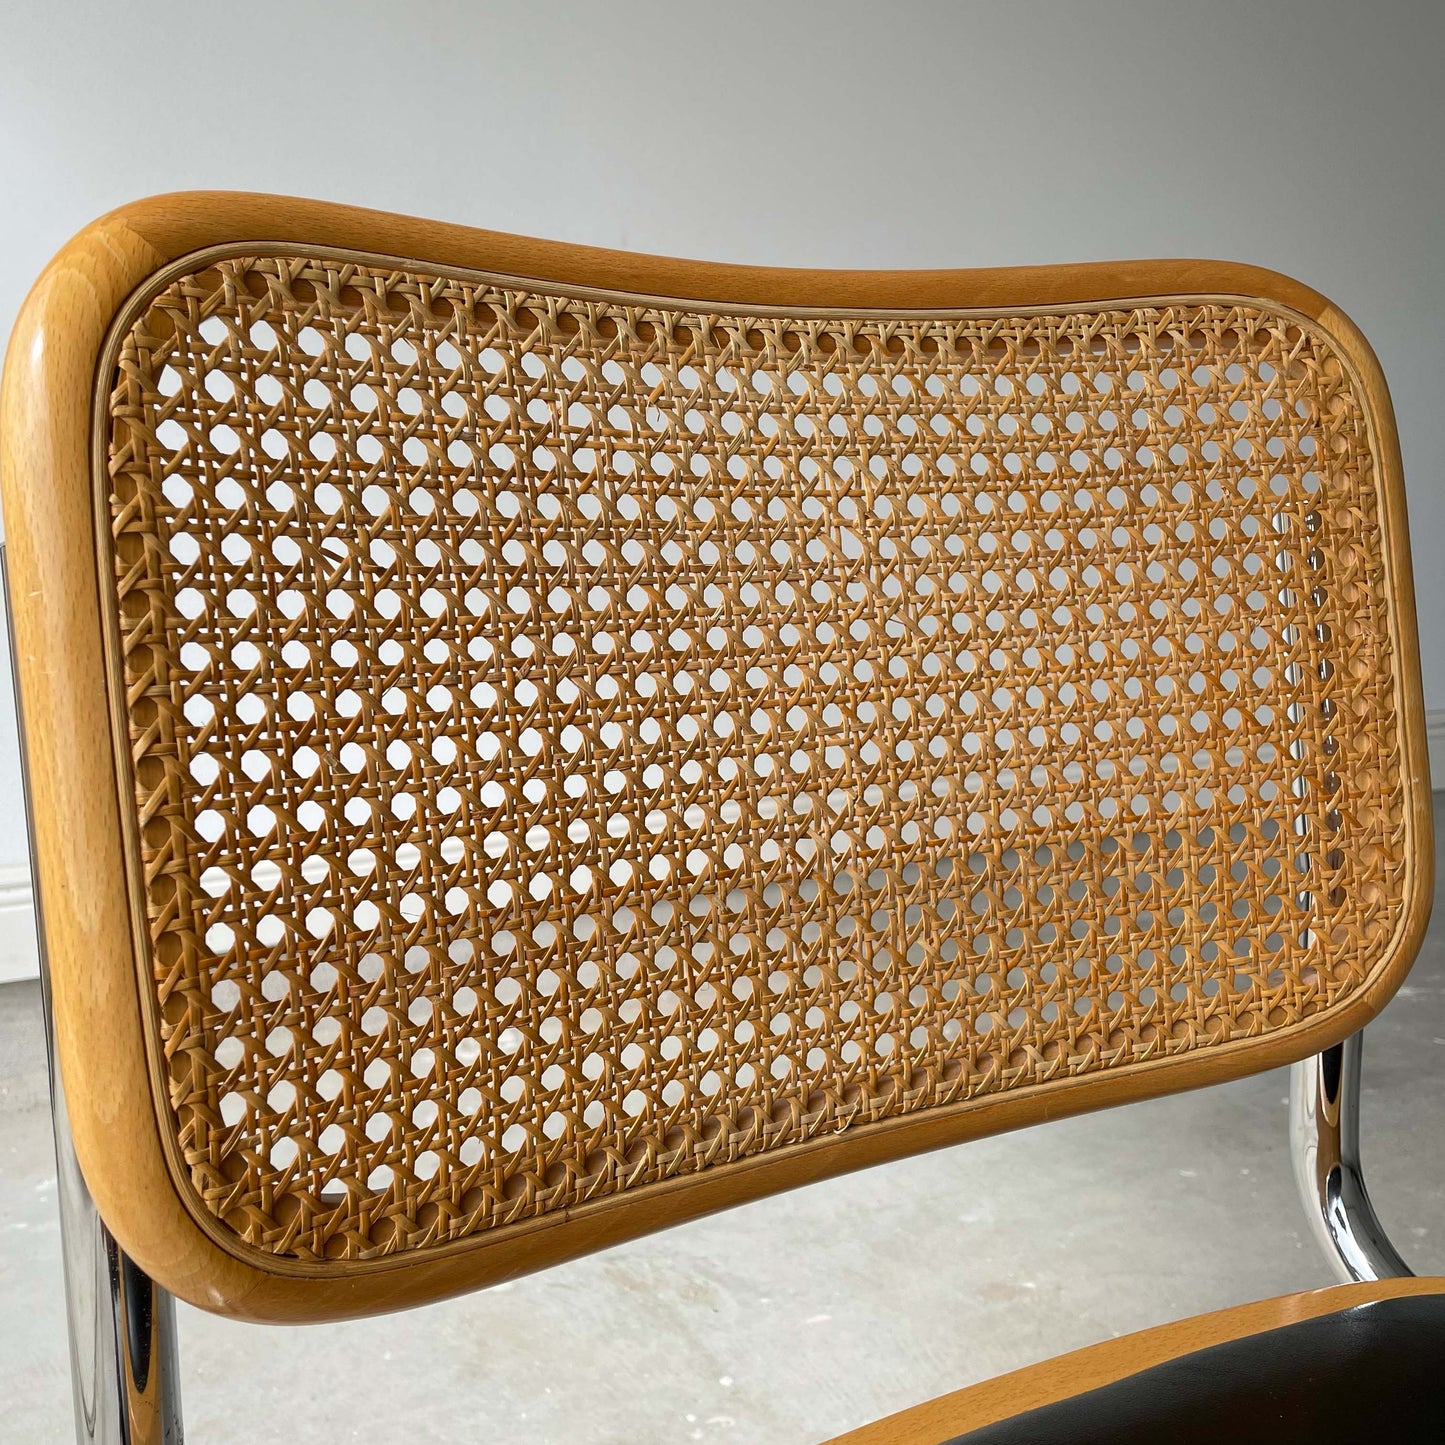 Marcel Breuer Cesca Style Chair: See Shipping Rules